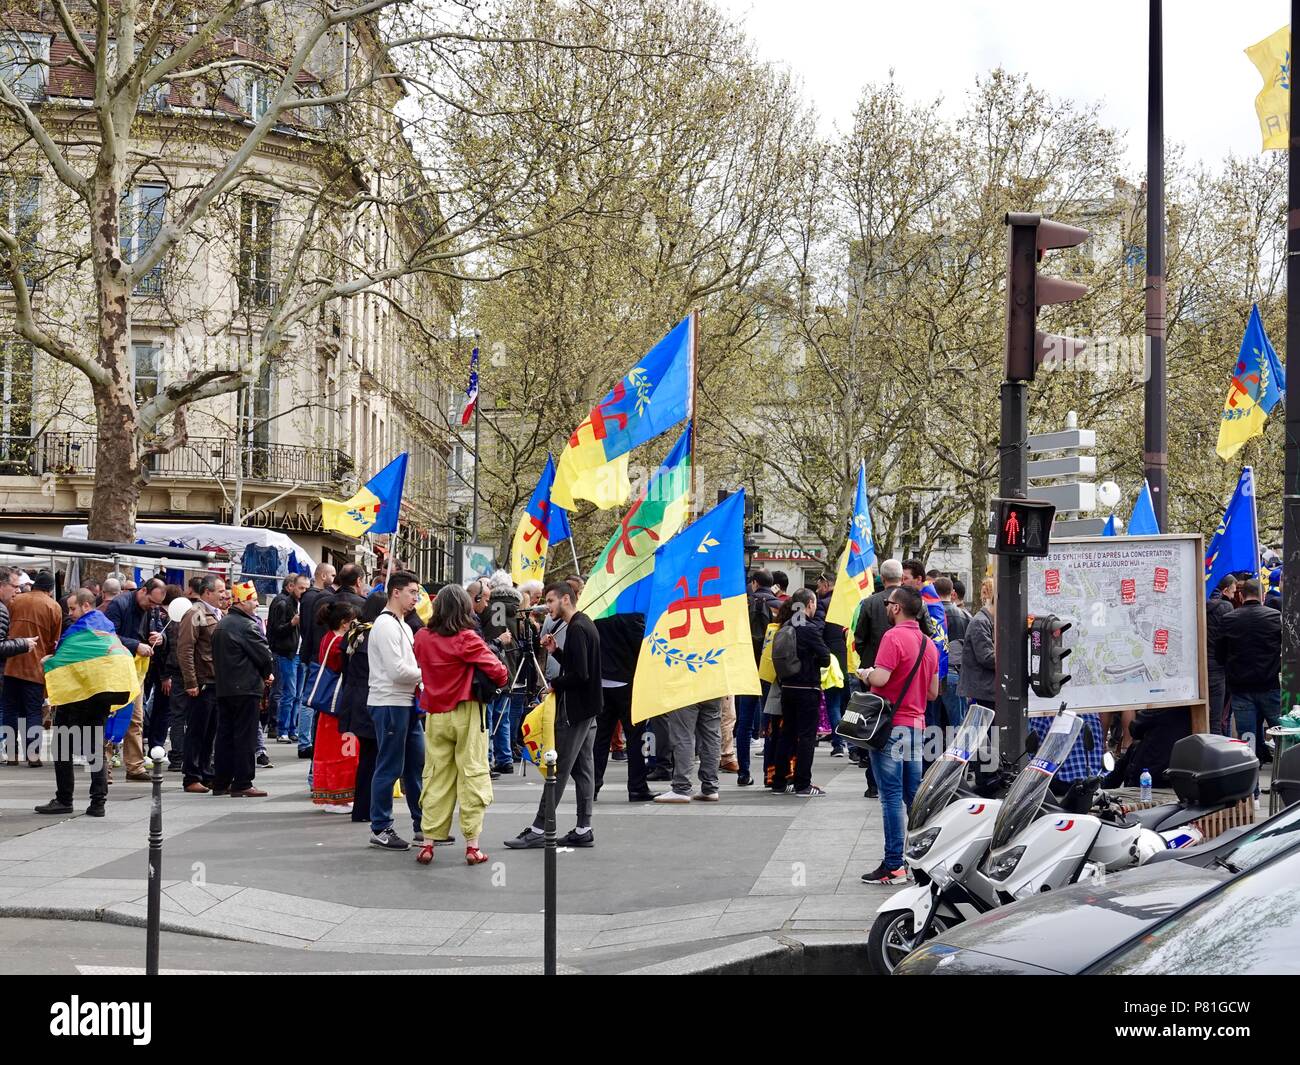 March for Kabylia's independence from Algeria. Crowd of people standing at Place Bastille carrying Kabyle and Berber flags, Paris, France Stock Photo